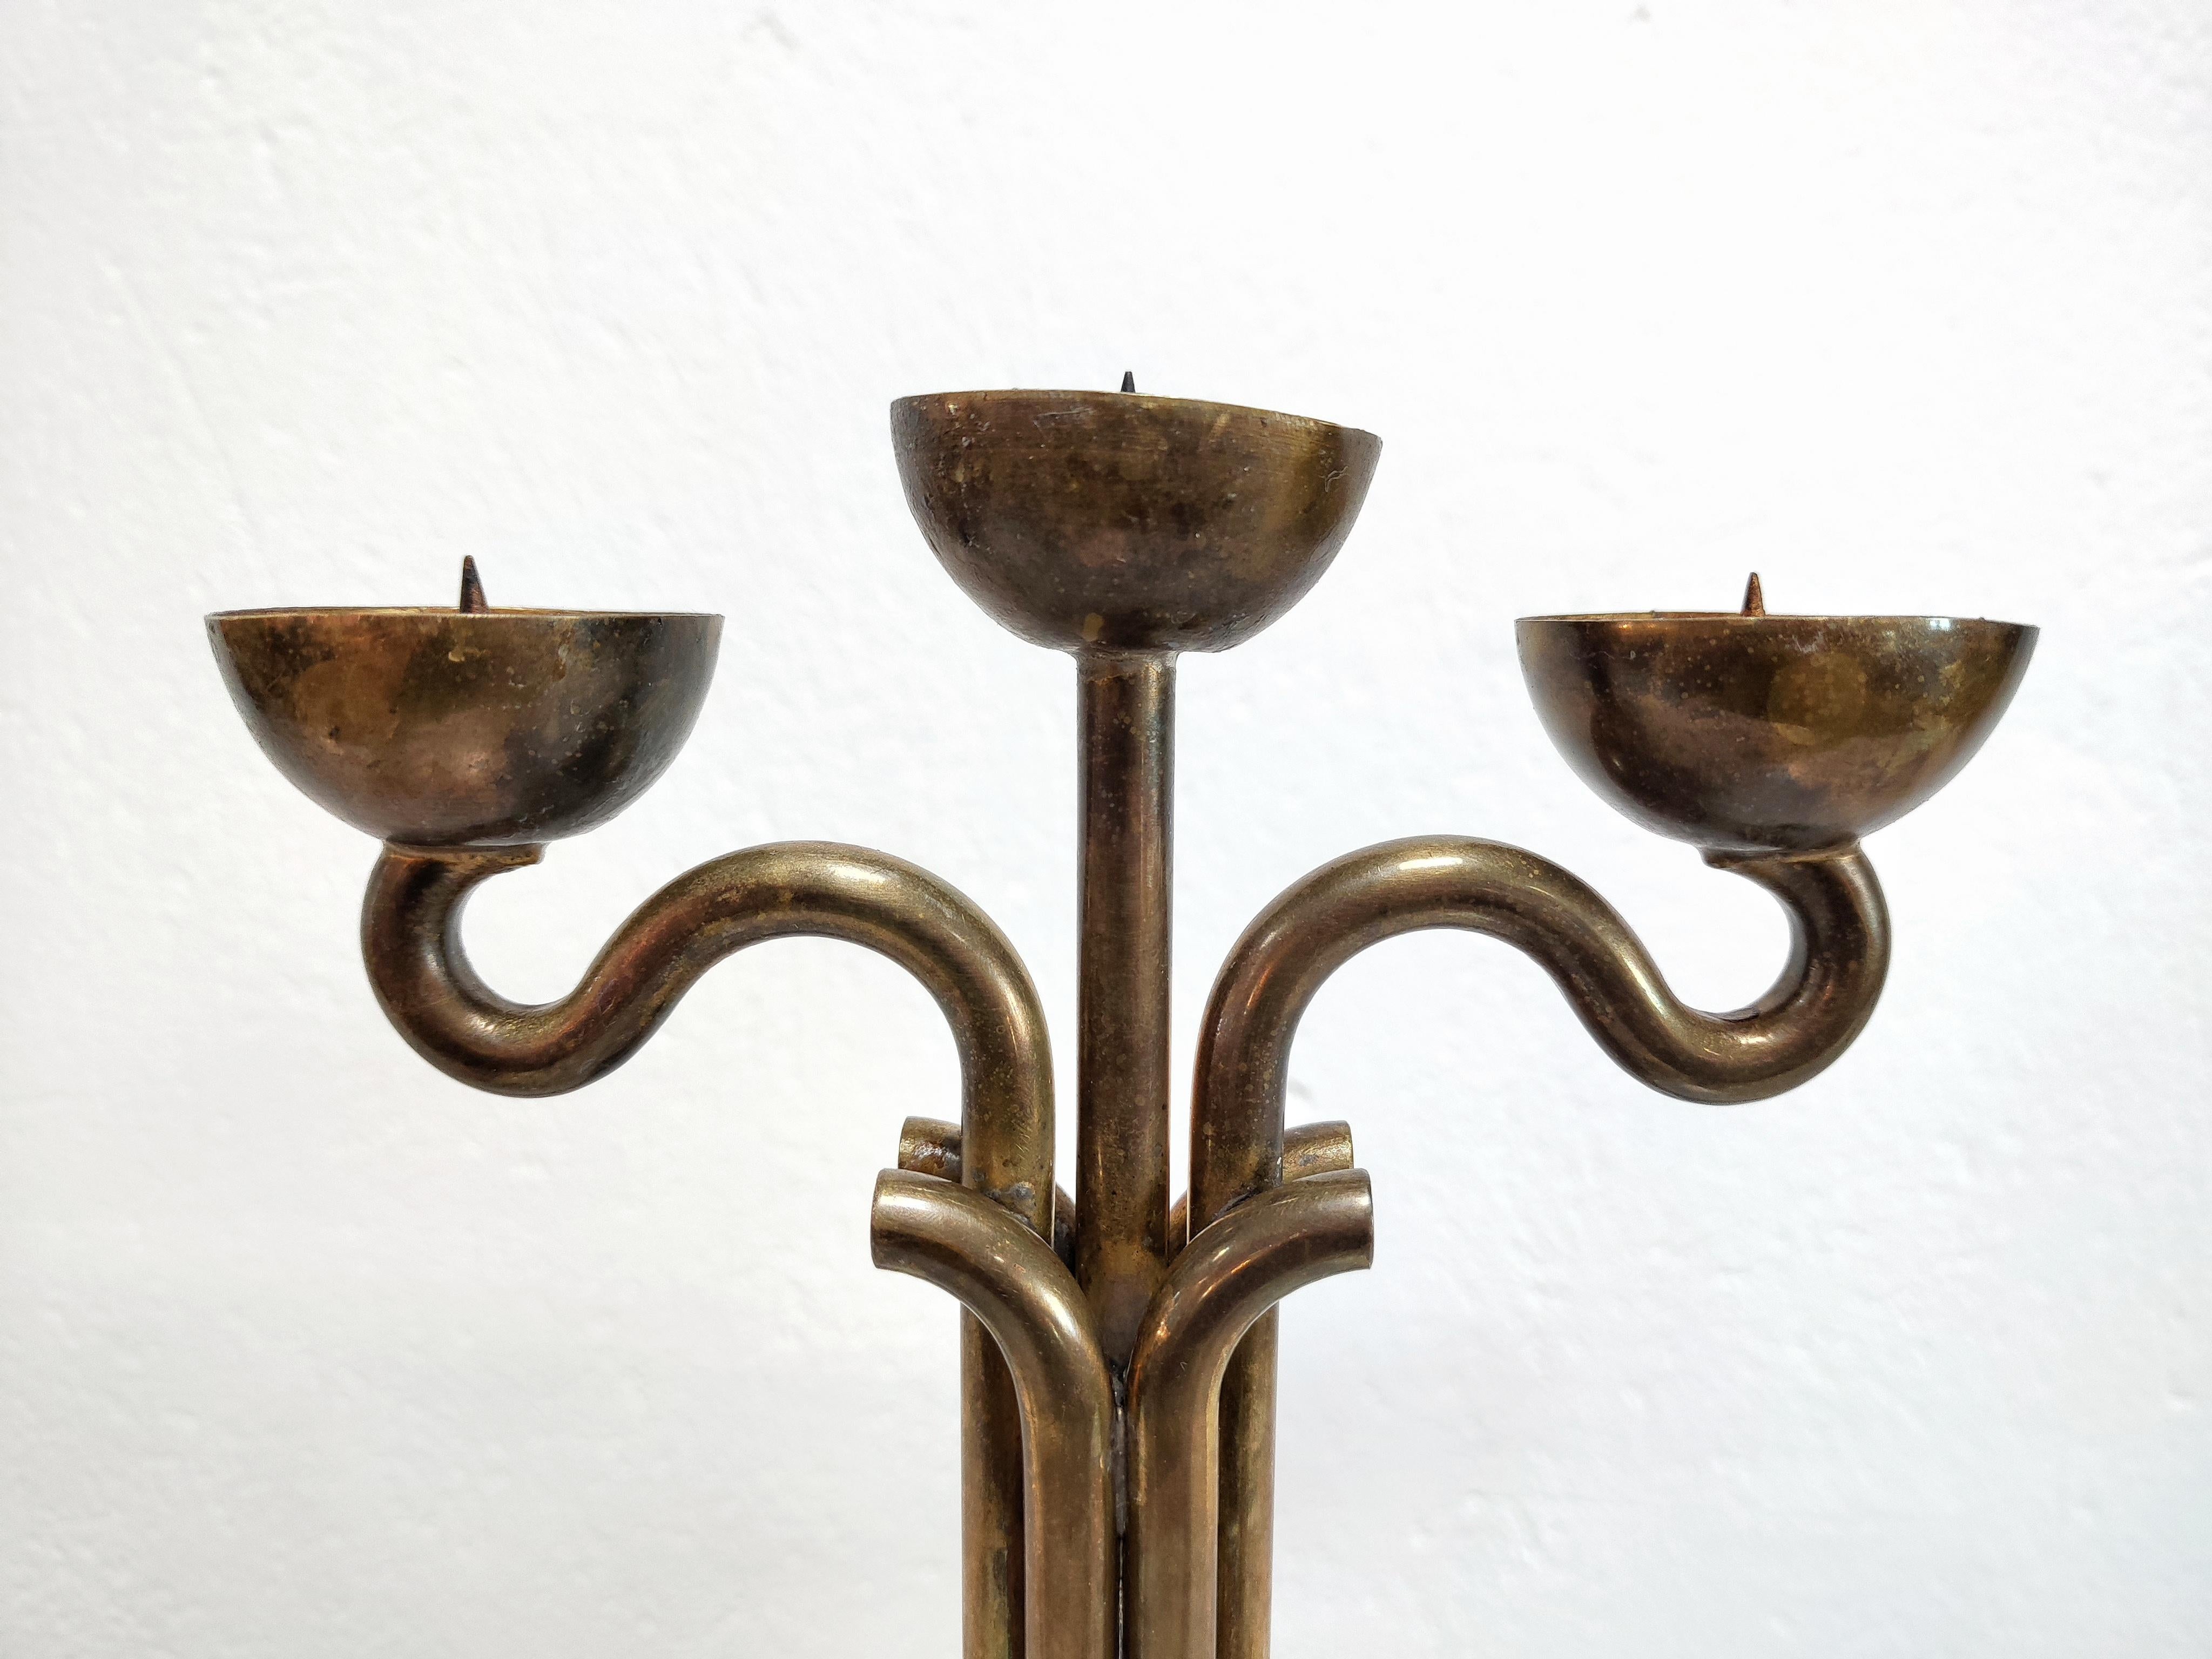 In this listing you will find a rare Brutalist three-arm candlestick holder done in bronze and chrome. It features sculptural form, with thick bronze sticks curved in symmetrical direction. The bronze sticks are attached to the chrome base. Very